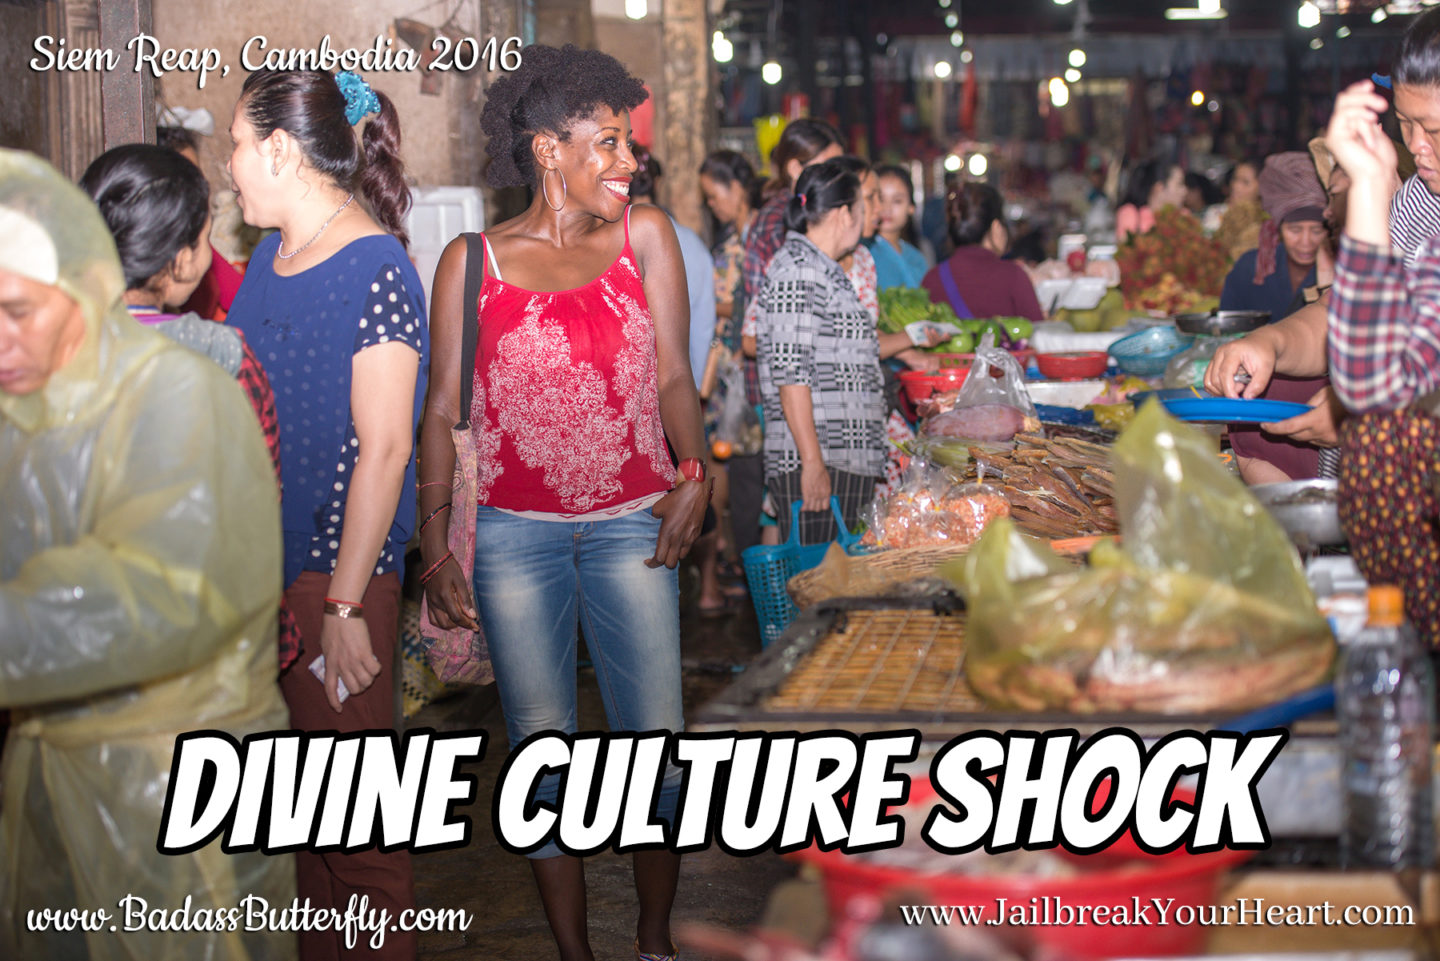 Crystal Lynn Bell exploring Divine Culture Shock in Cambodia